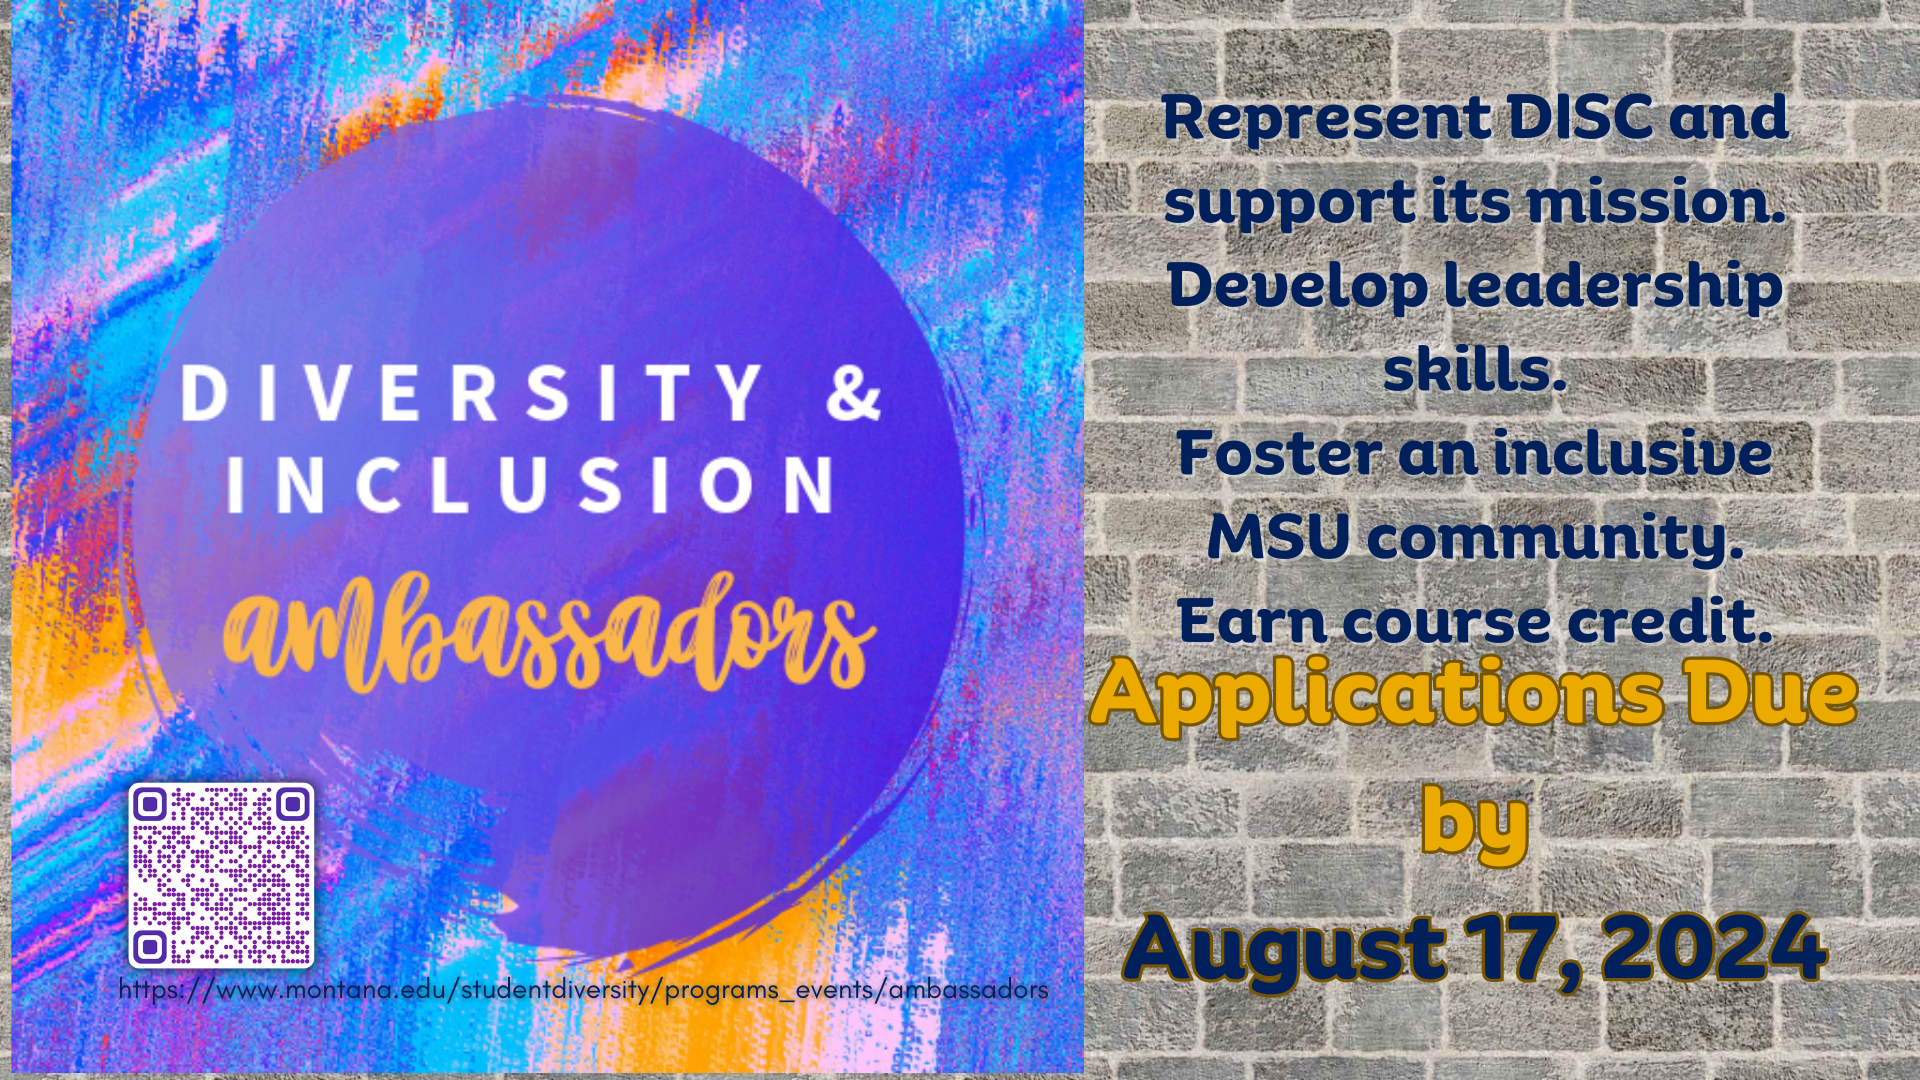 The DISC is accepting ambassador applications until August 17, 2024.